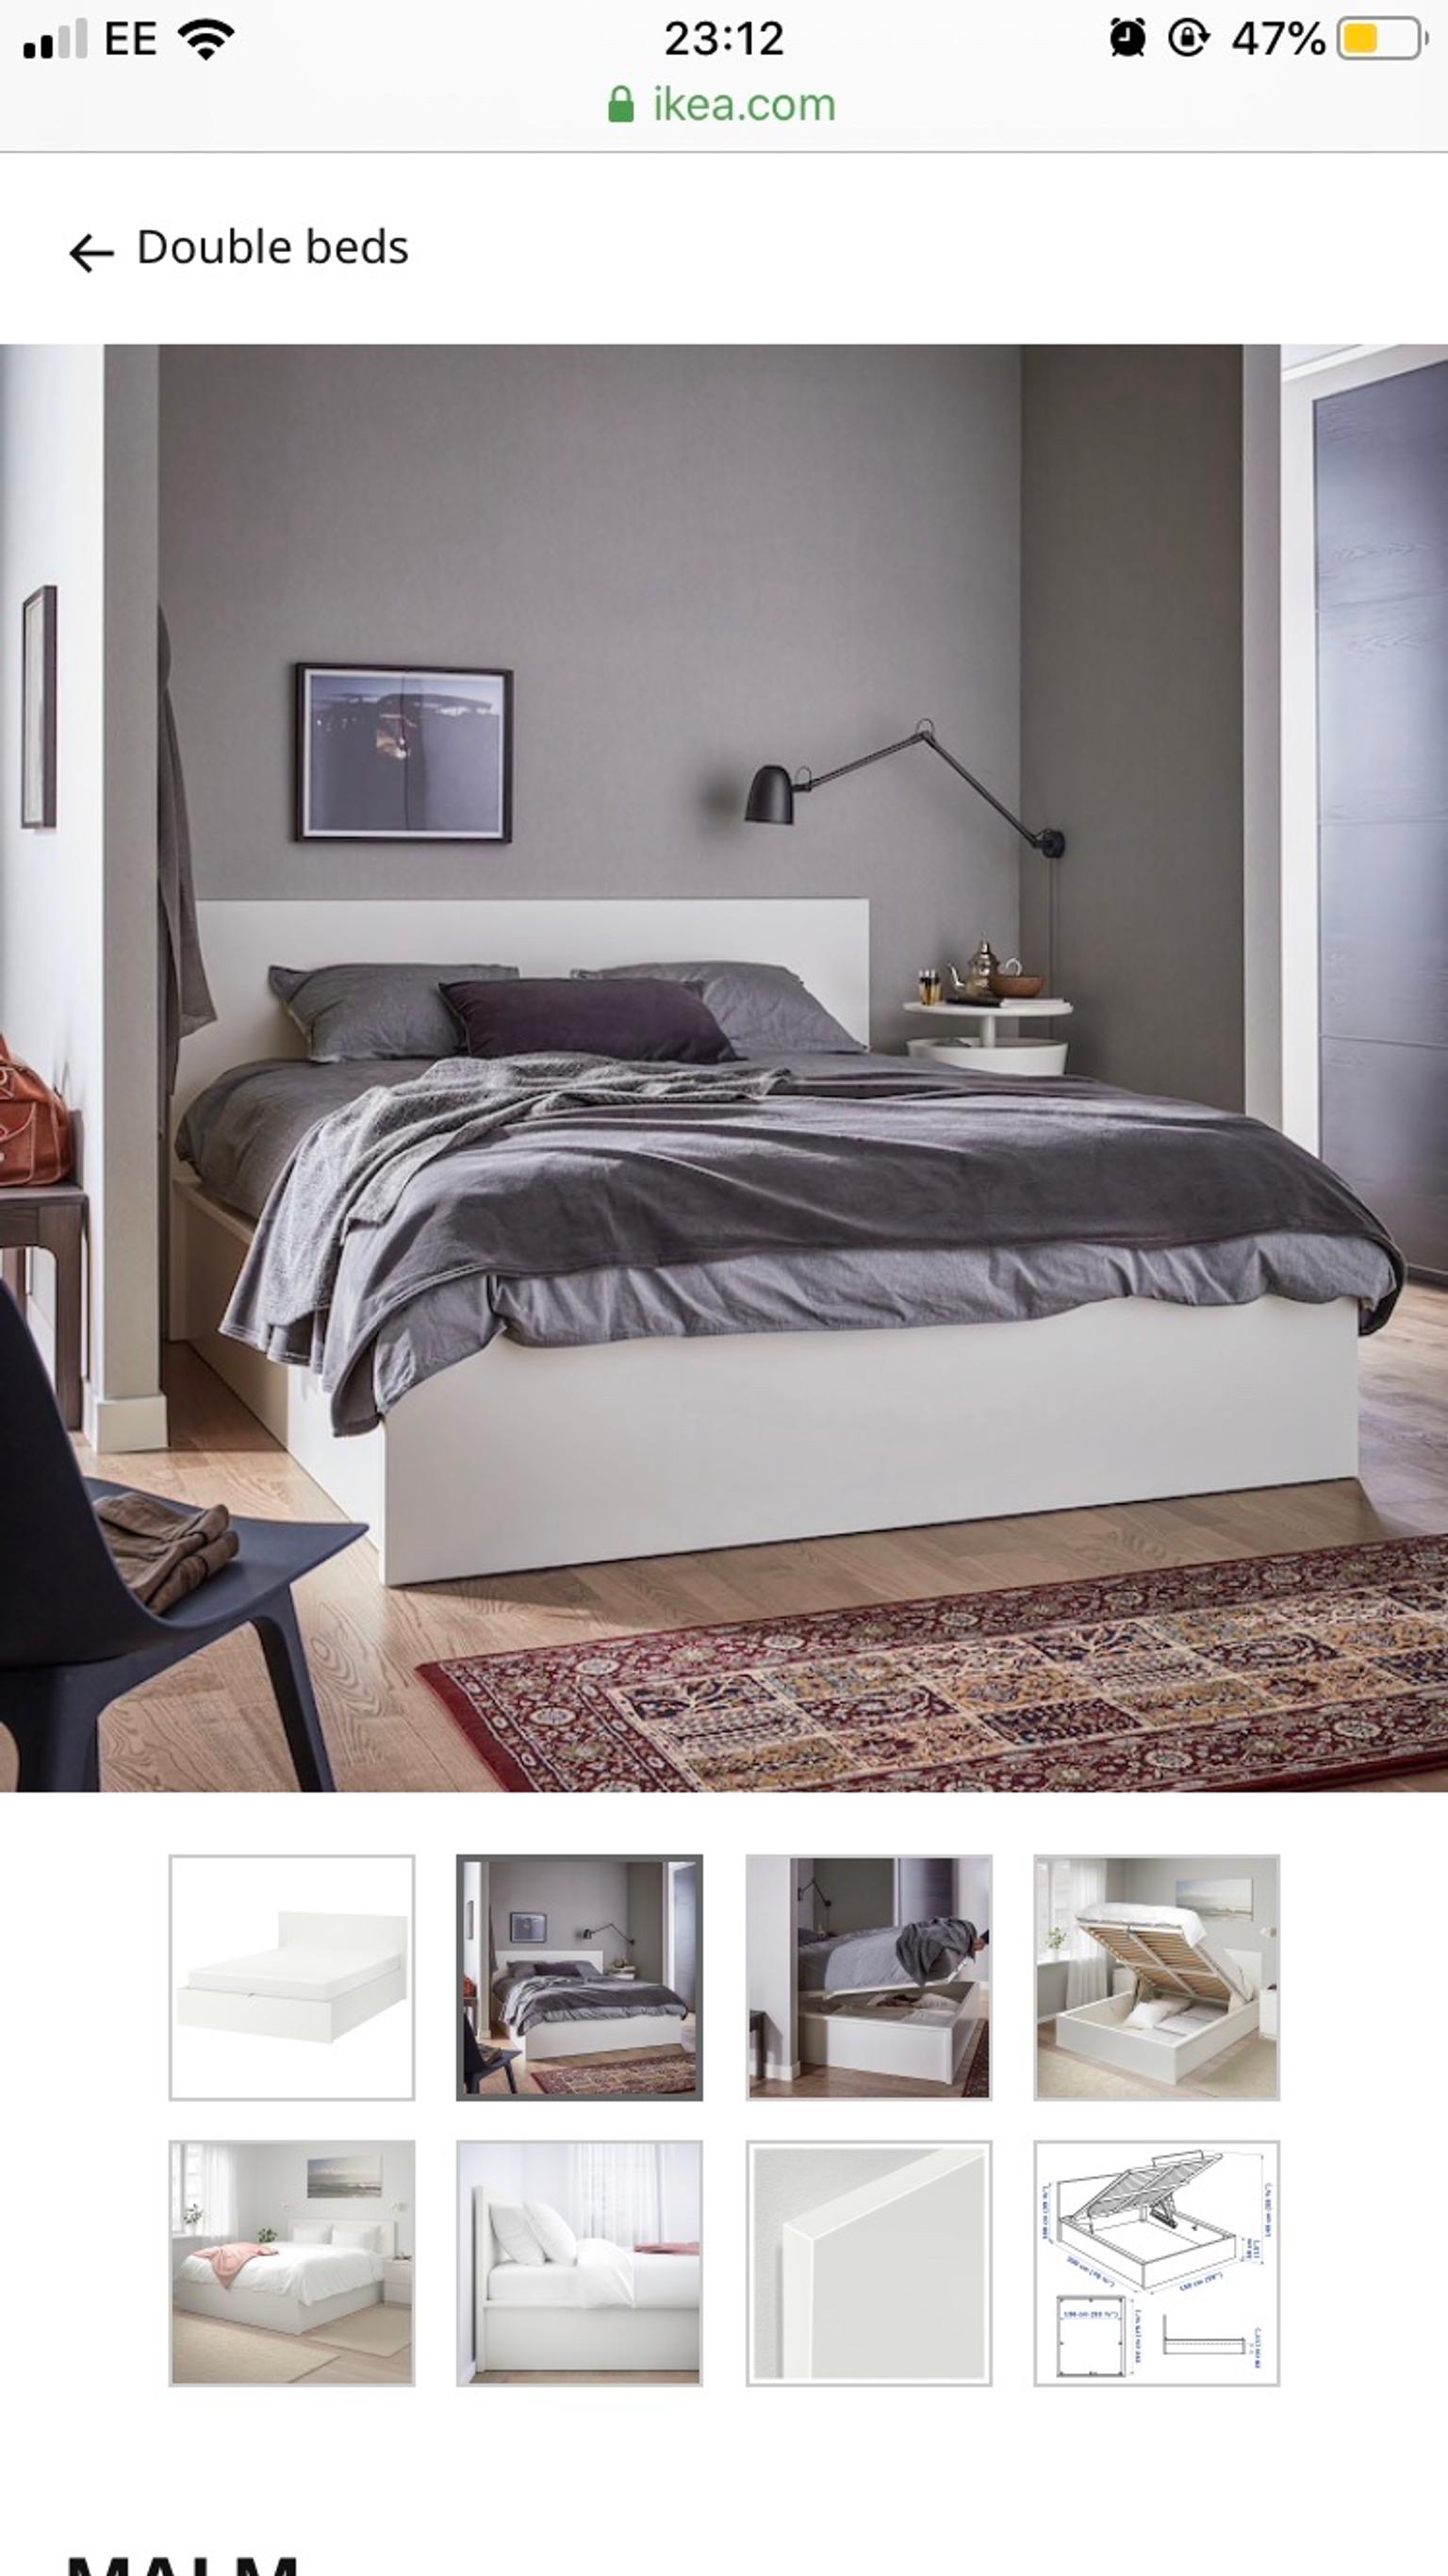 Ikea Malm Ottoman Double Bed Assembly, Ikea King Size Bed Frame Instructions